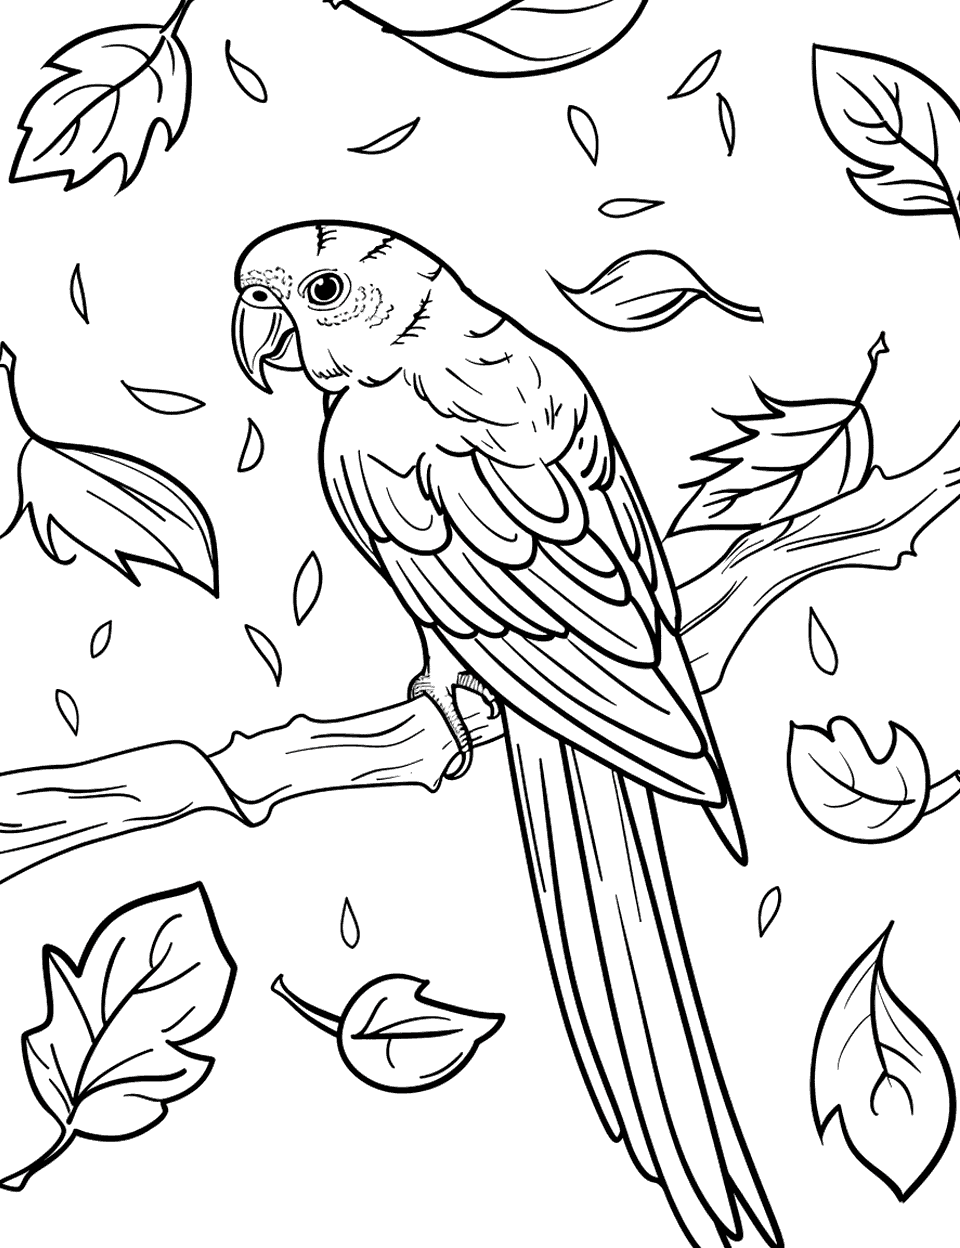 Parakeet and Falling Leaves Parrot Coloring Page - A parakeet watching leaves fall around it, capturing the essence of autumn.